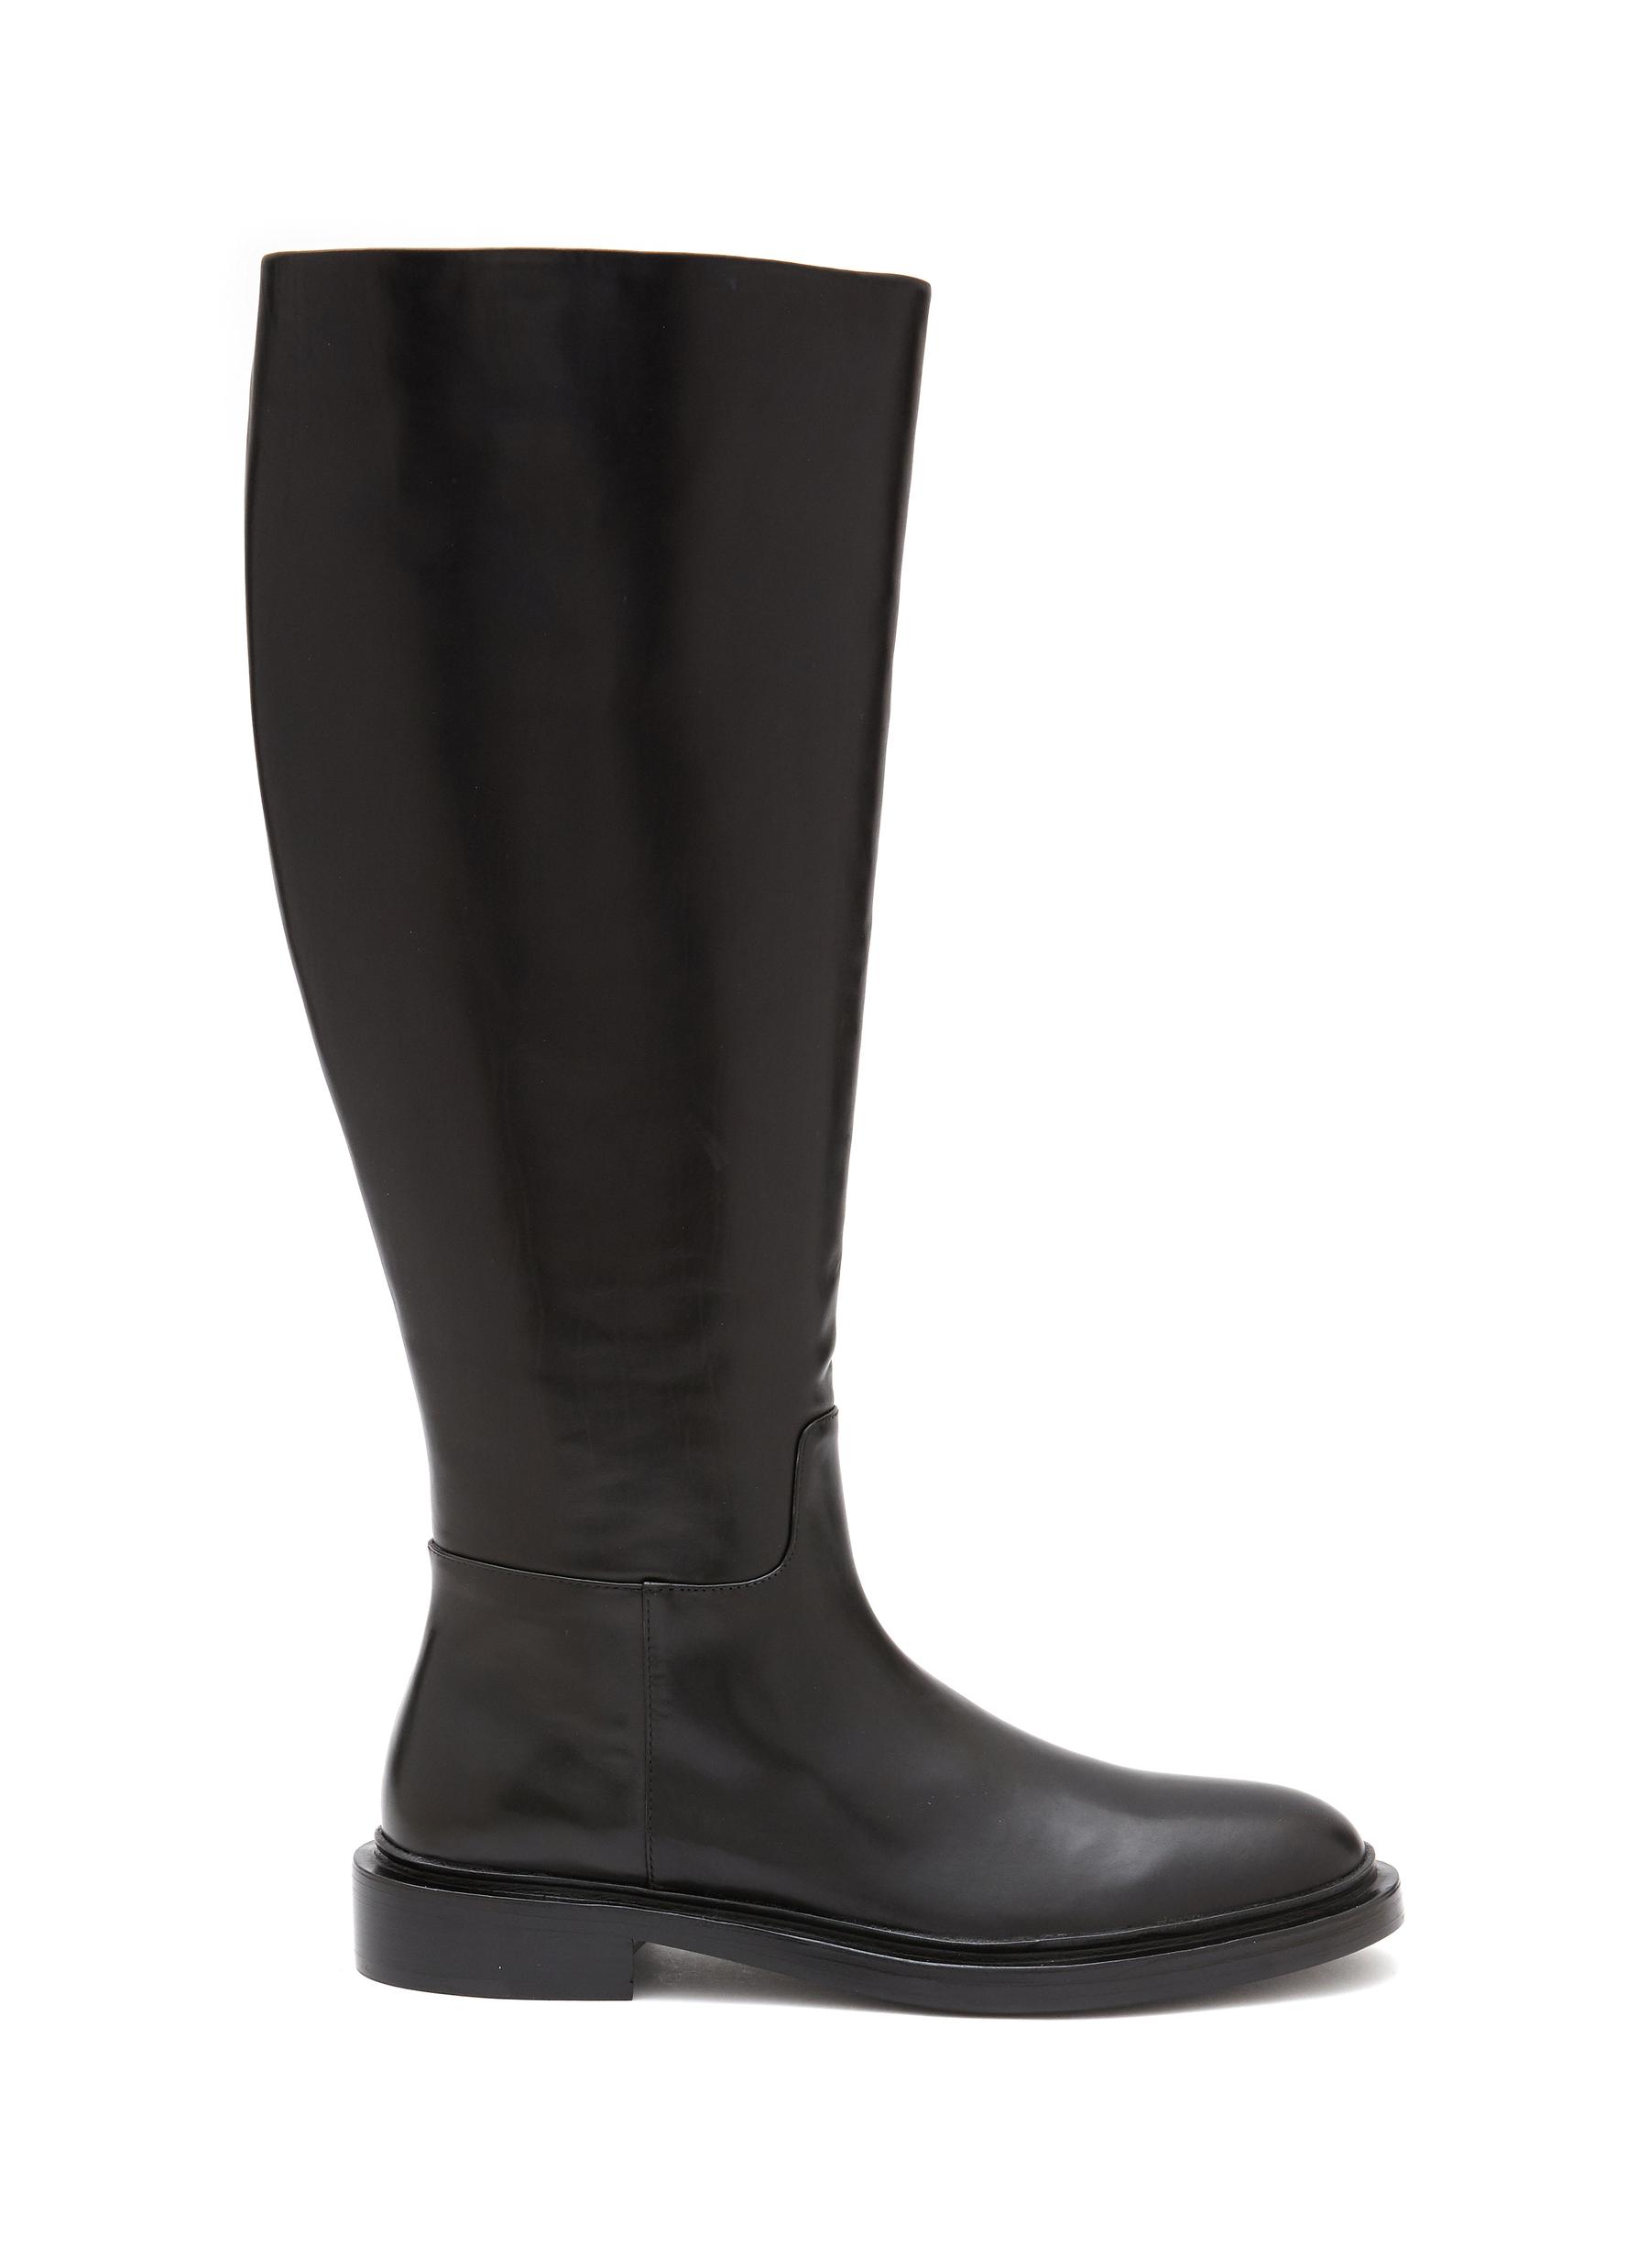 EQUIL ‘Madrid' Leather Tall Riding Boots